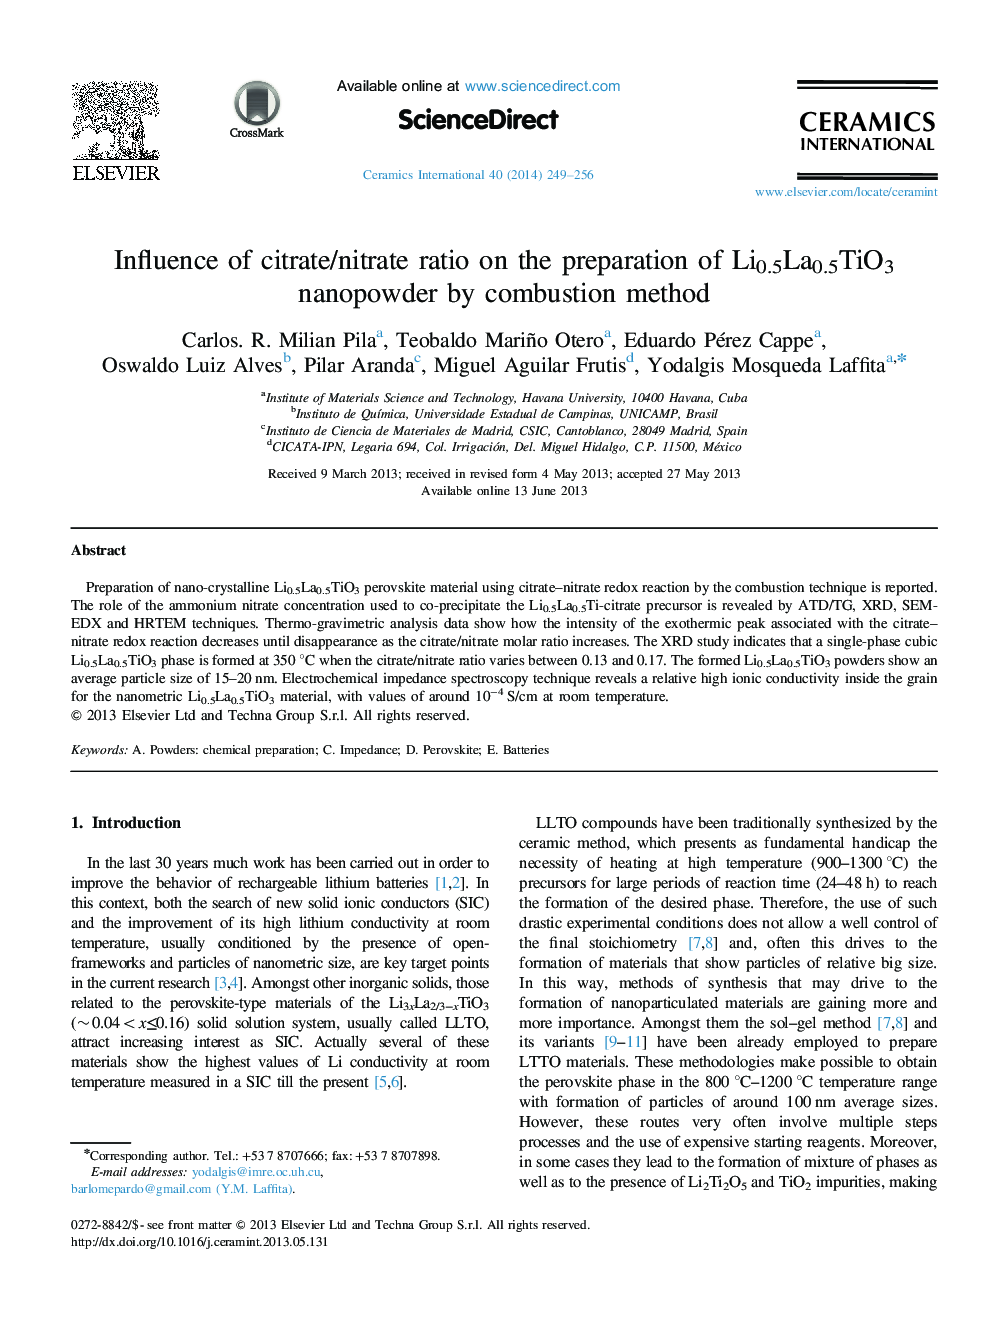 Influence of citrate/nitrate ratio on the preparation of Li0.5La0.5TiO3 nanopowder by combustion method